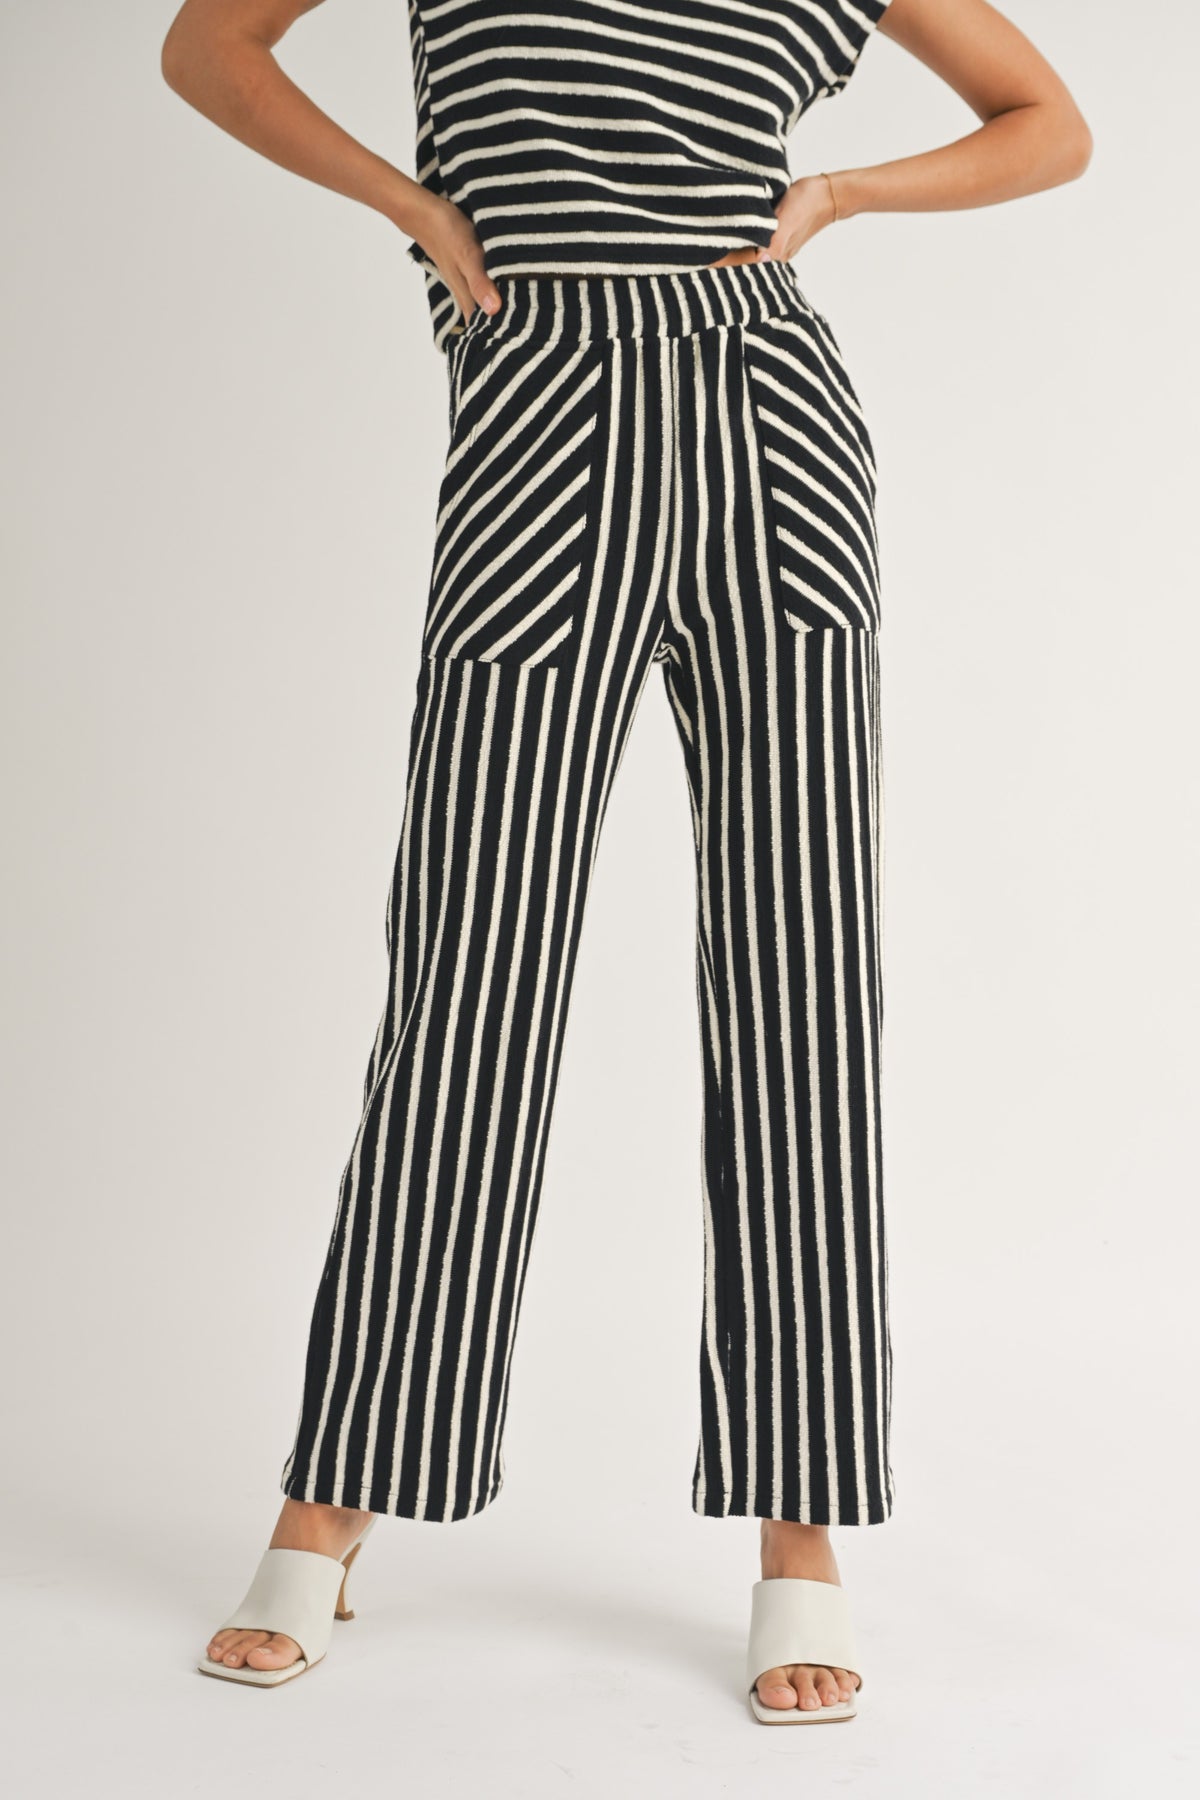 textured stripe knitted pants in black and white-front view